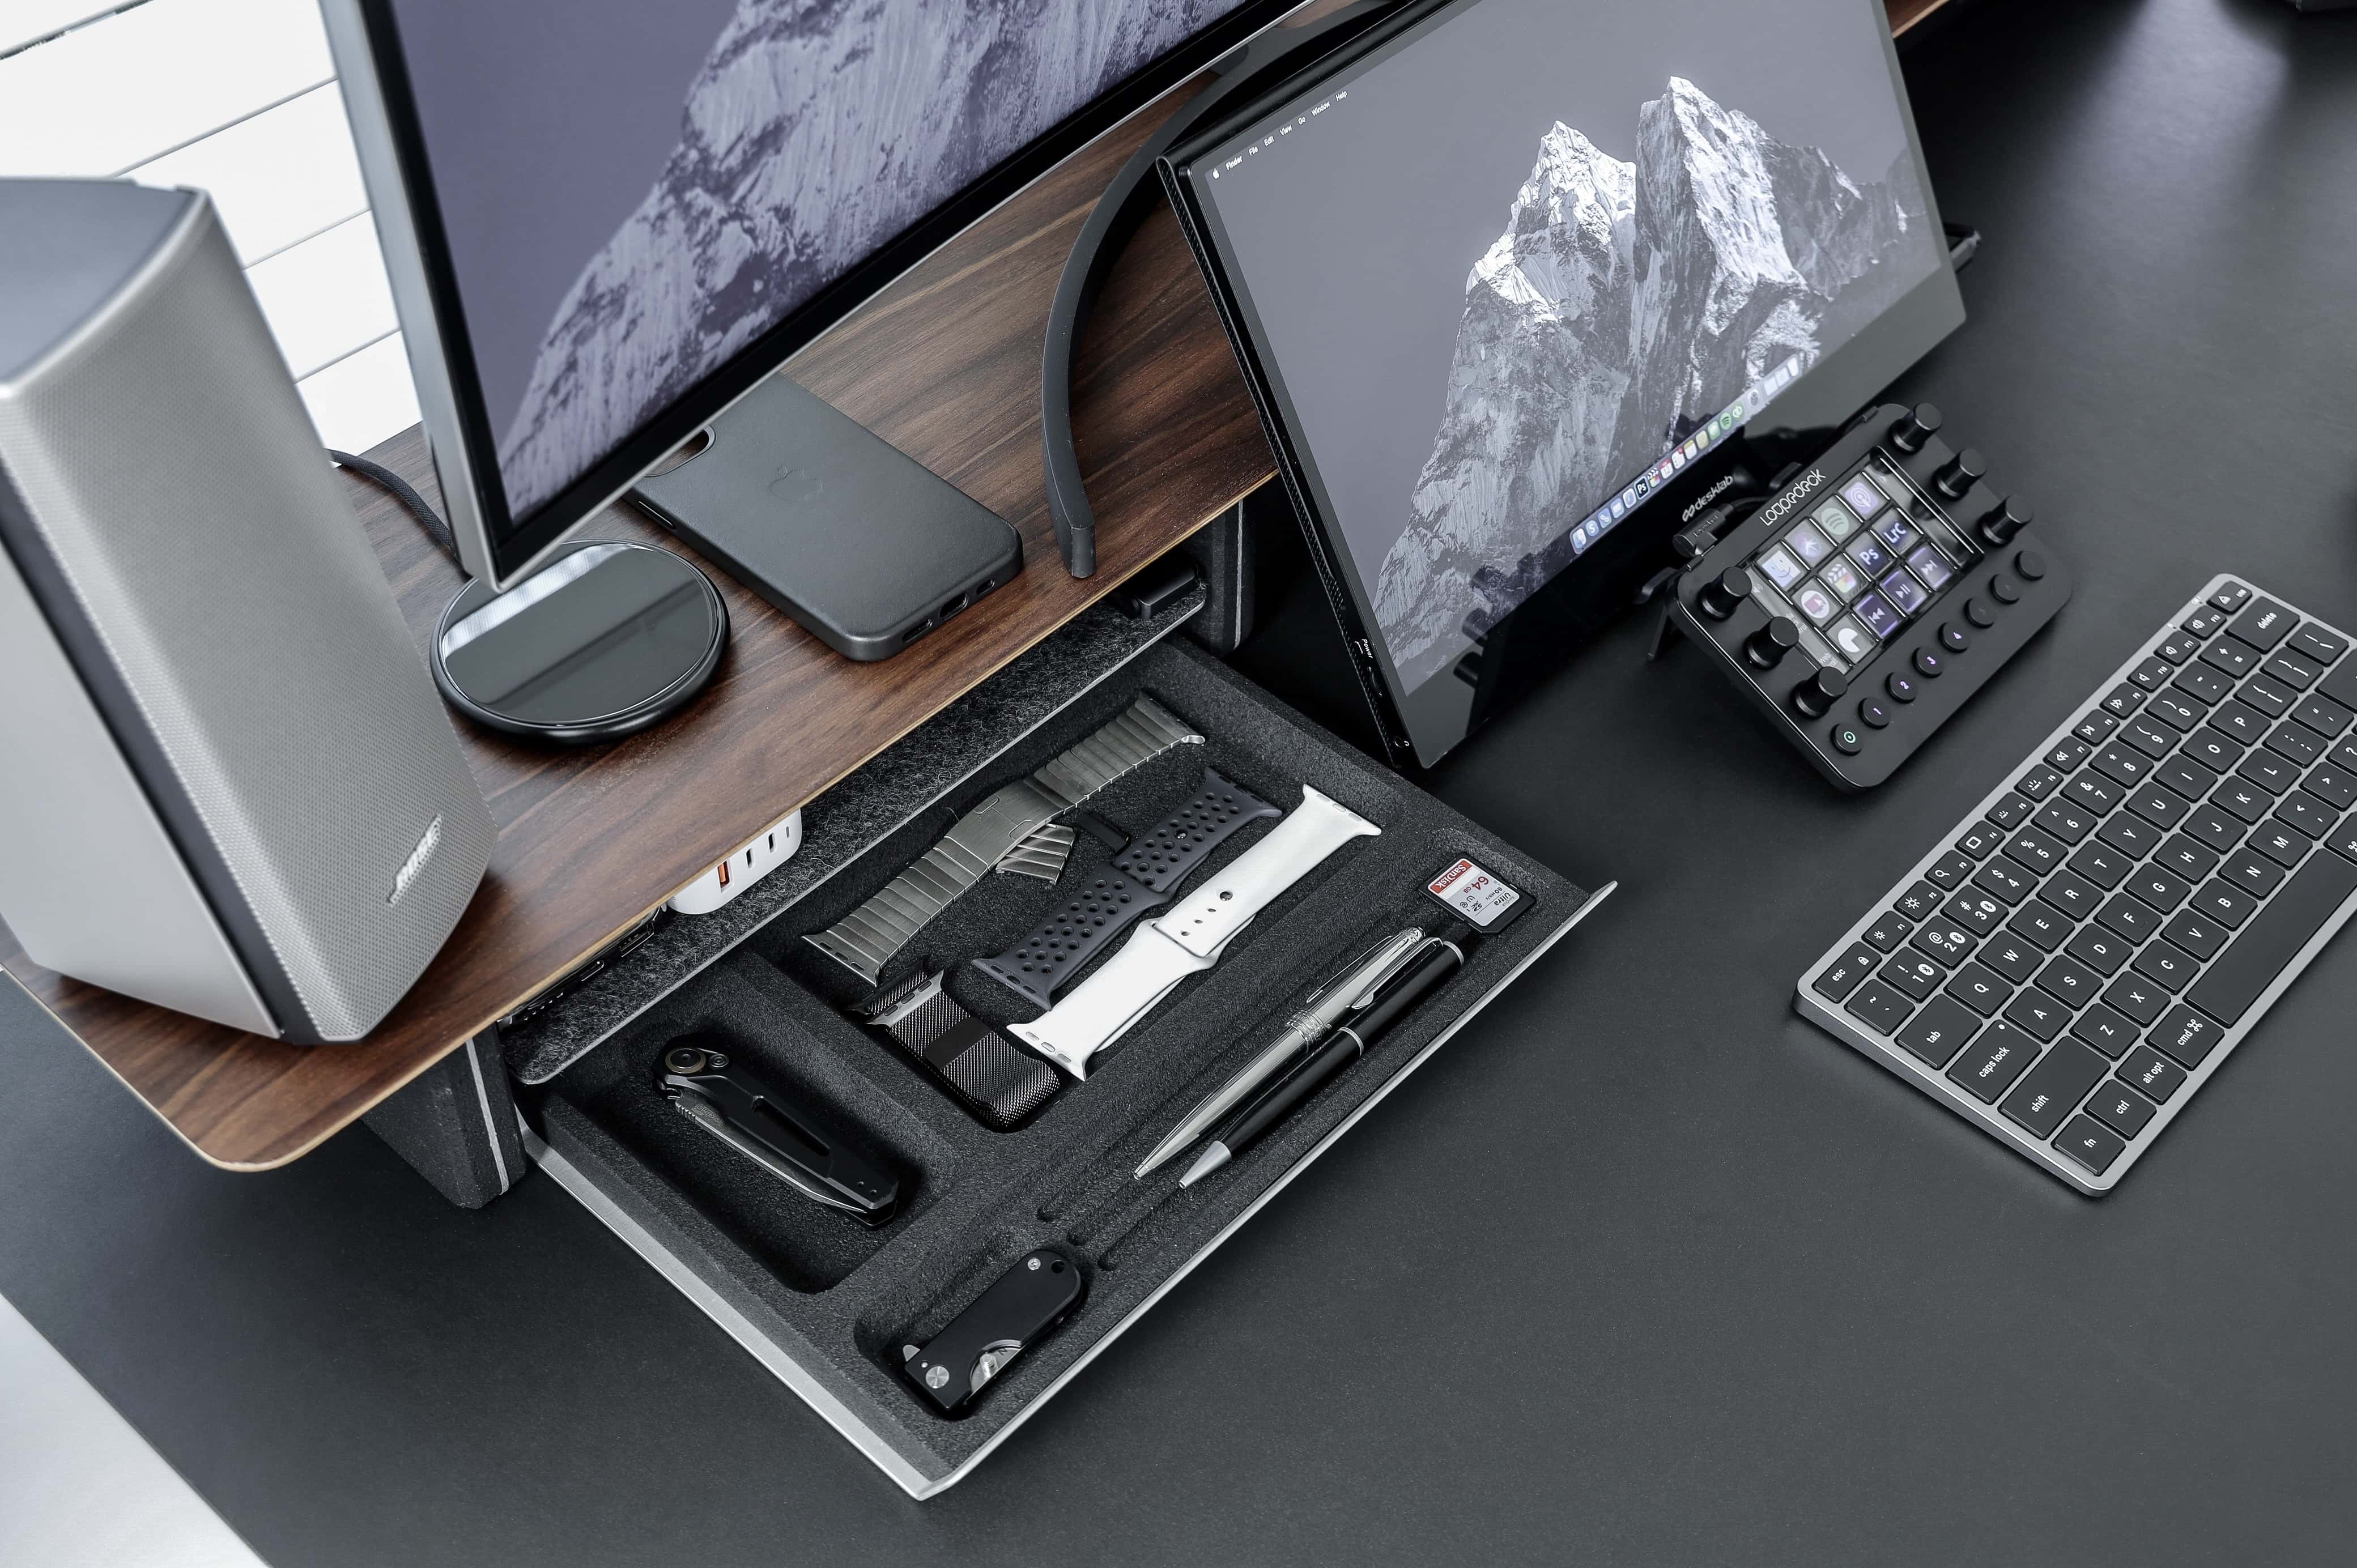 A desk tray and a disk charger help to keep things nice and neat.